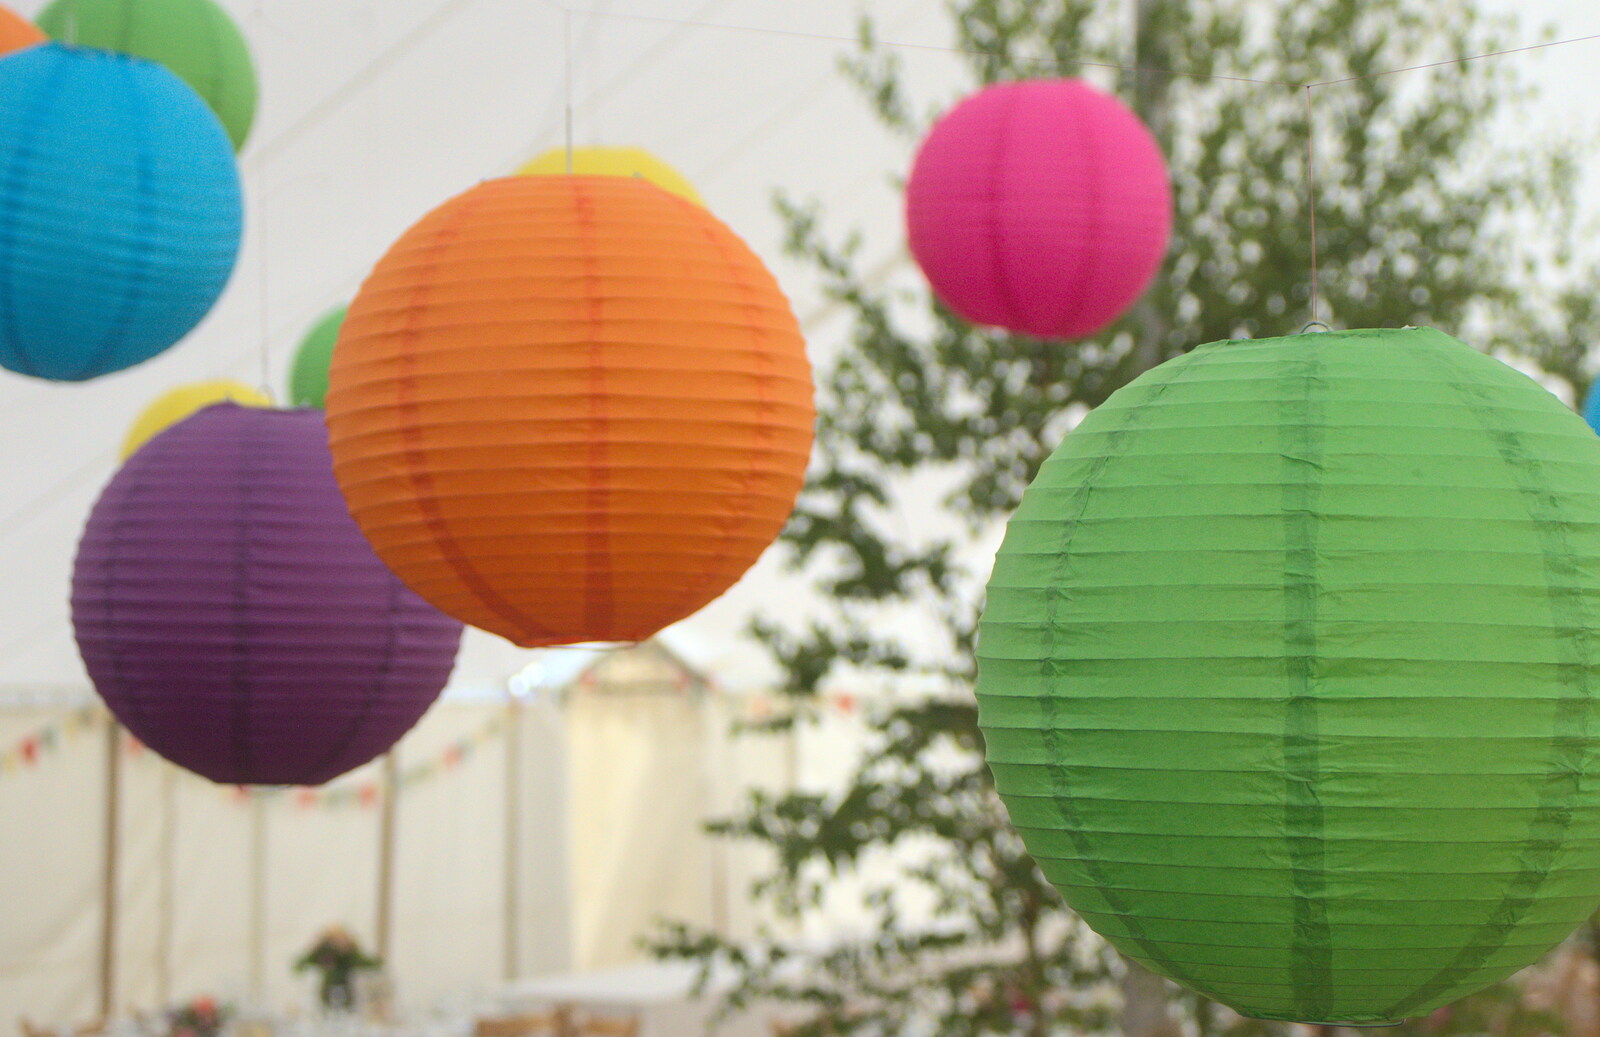 Multi-coloured hanging lampshades from The BBs Play Steph's Wedding, Burston, Norfolk - 13th July 2013